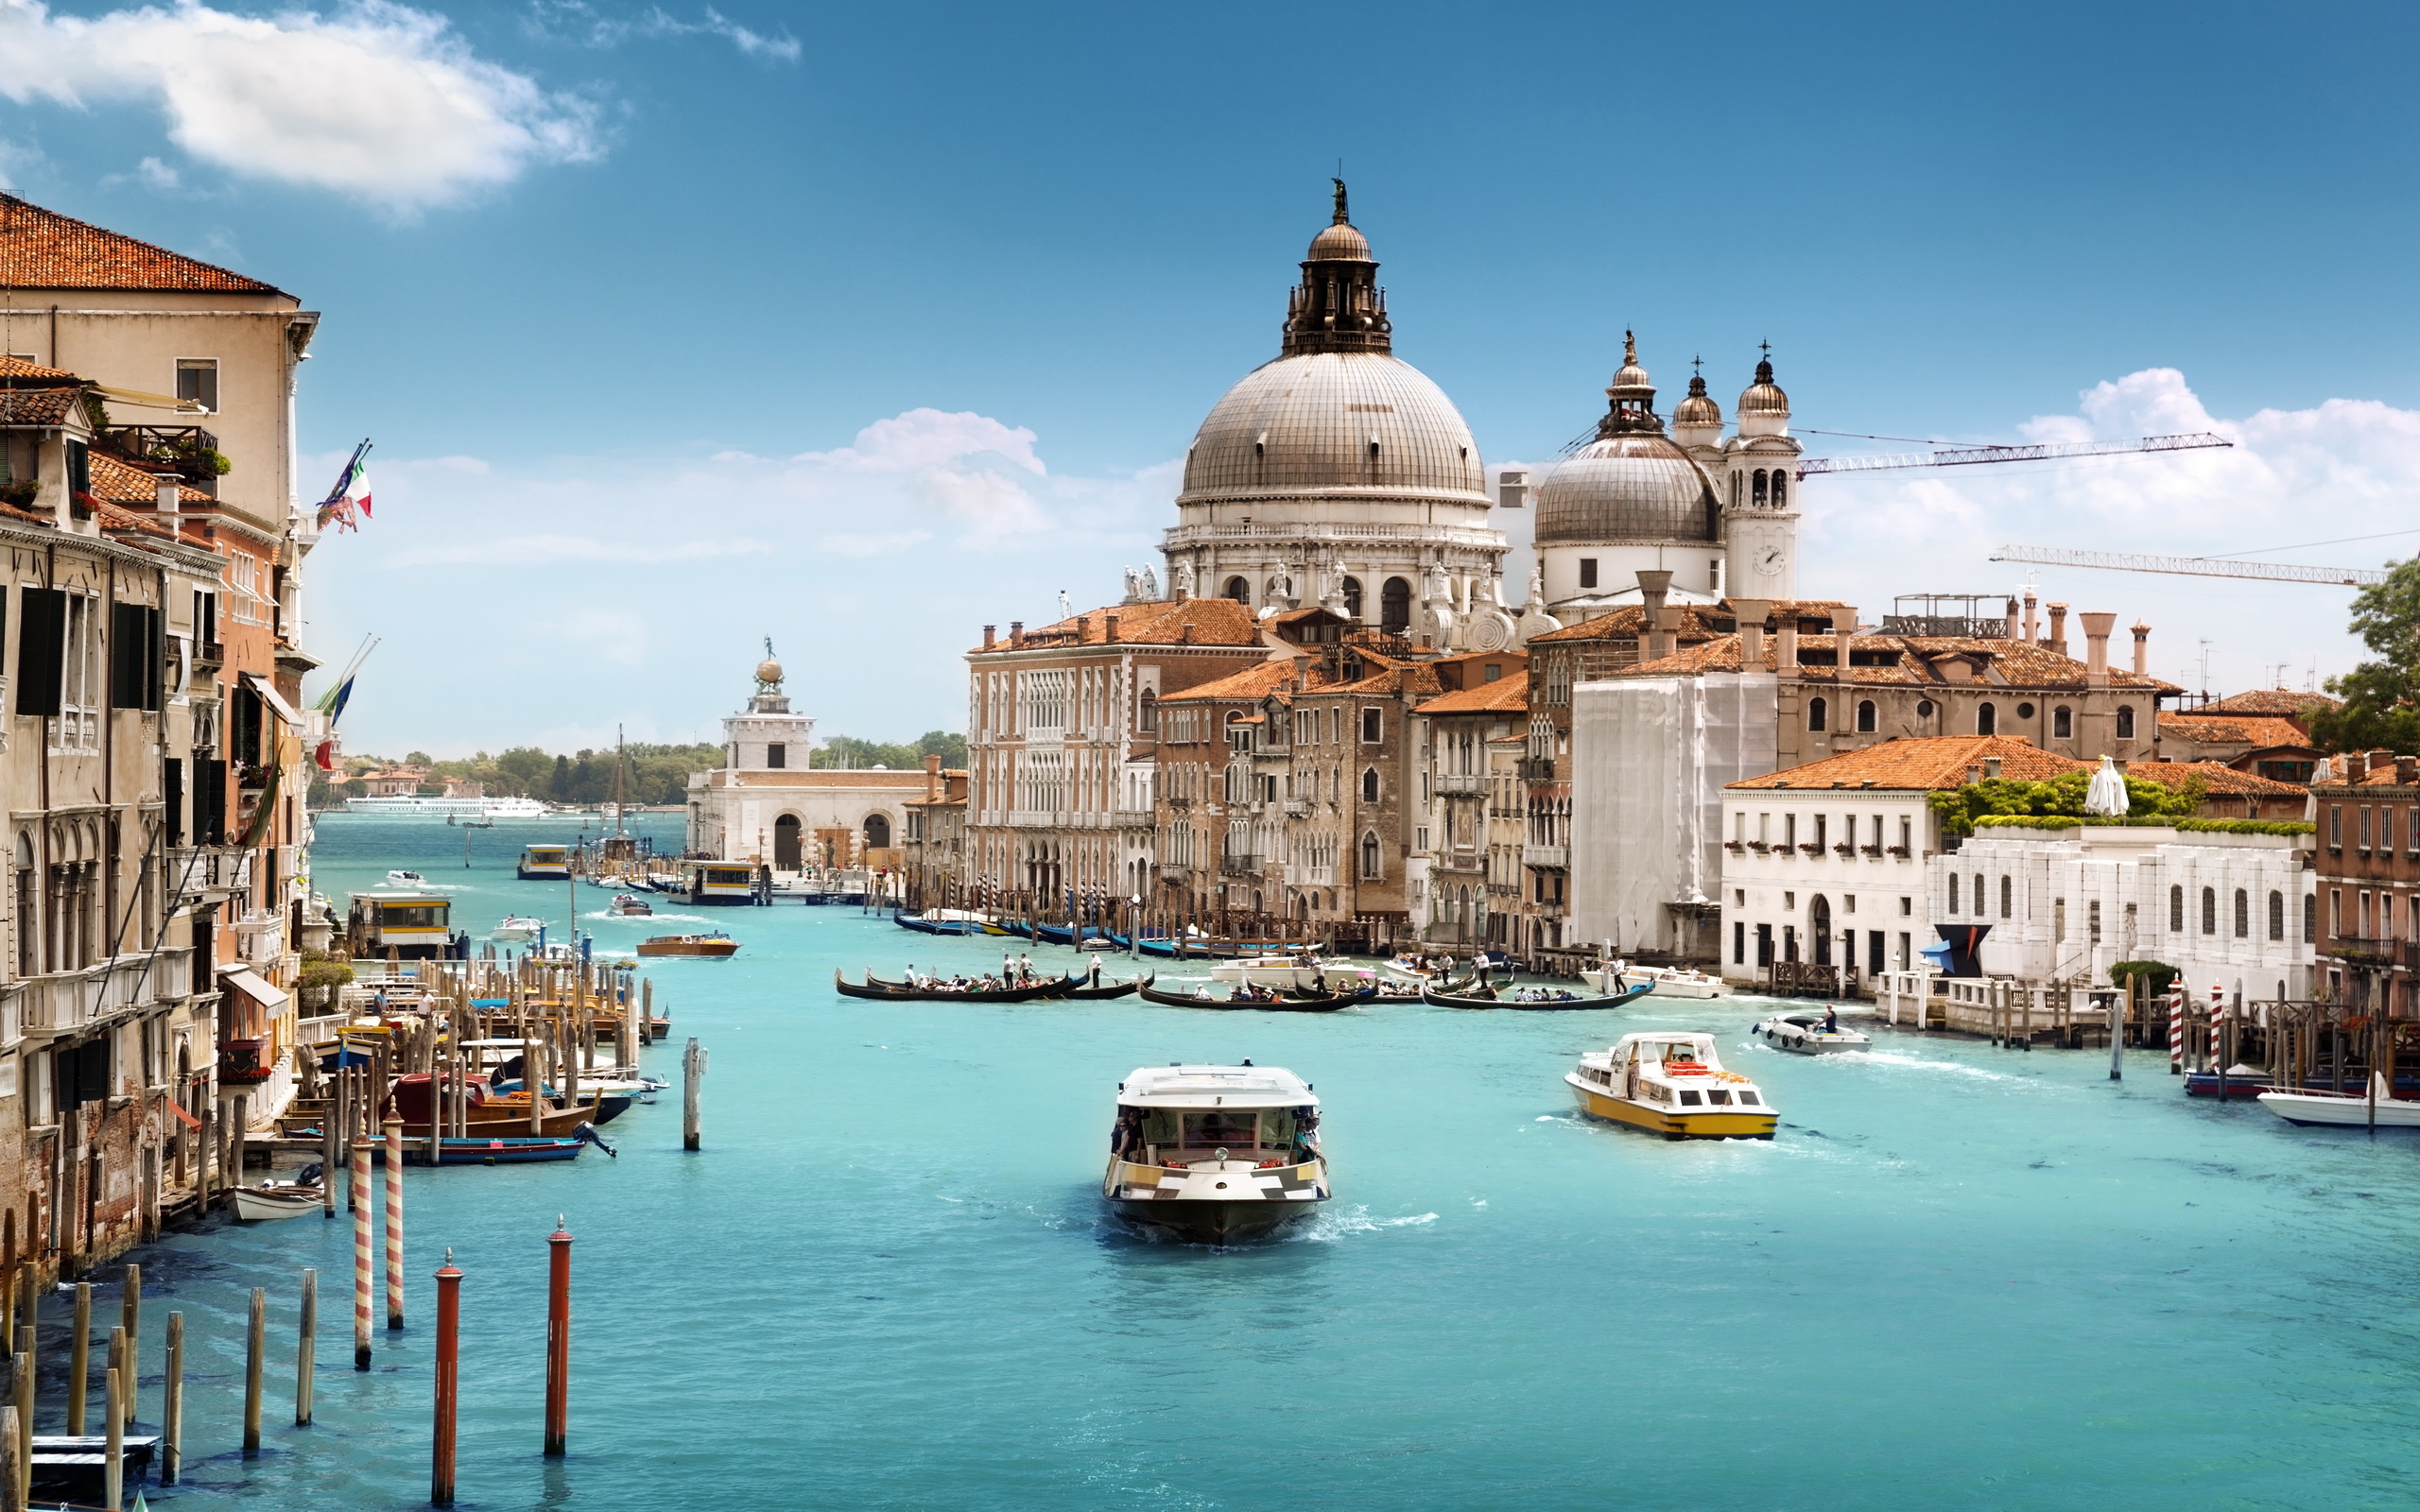 The Grand Canal Of Venice Italy HD Wallpaper Background Image